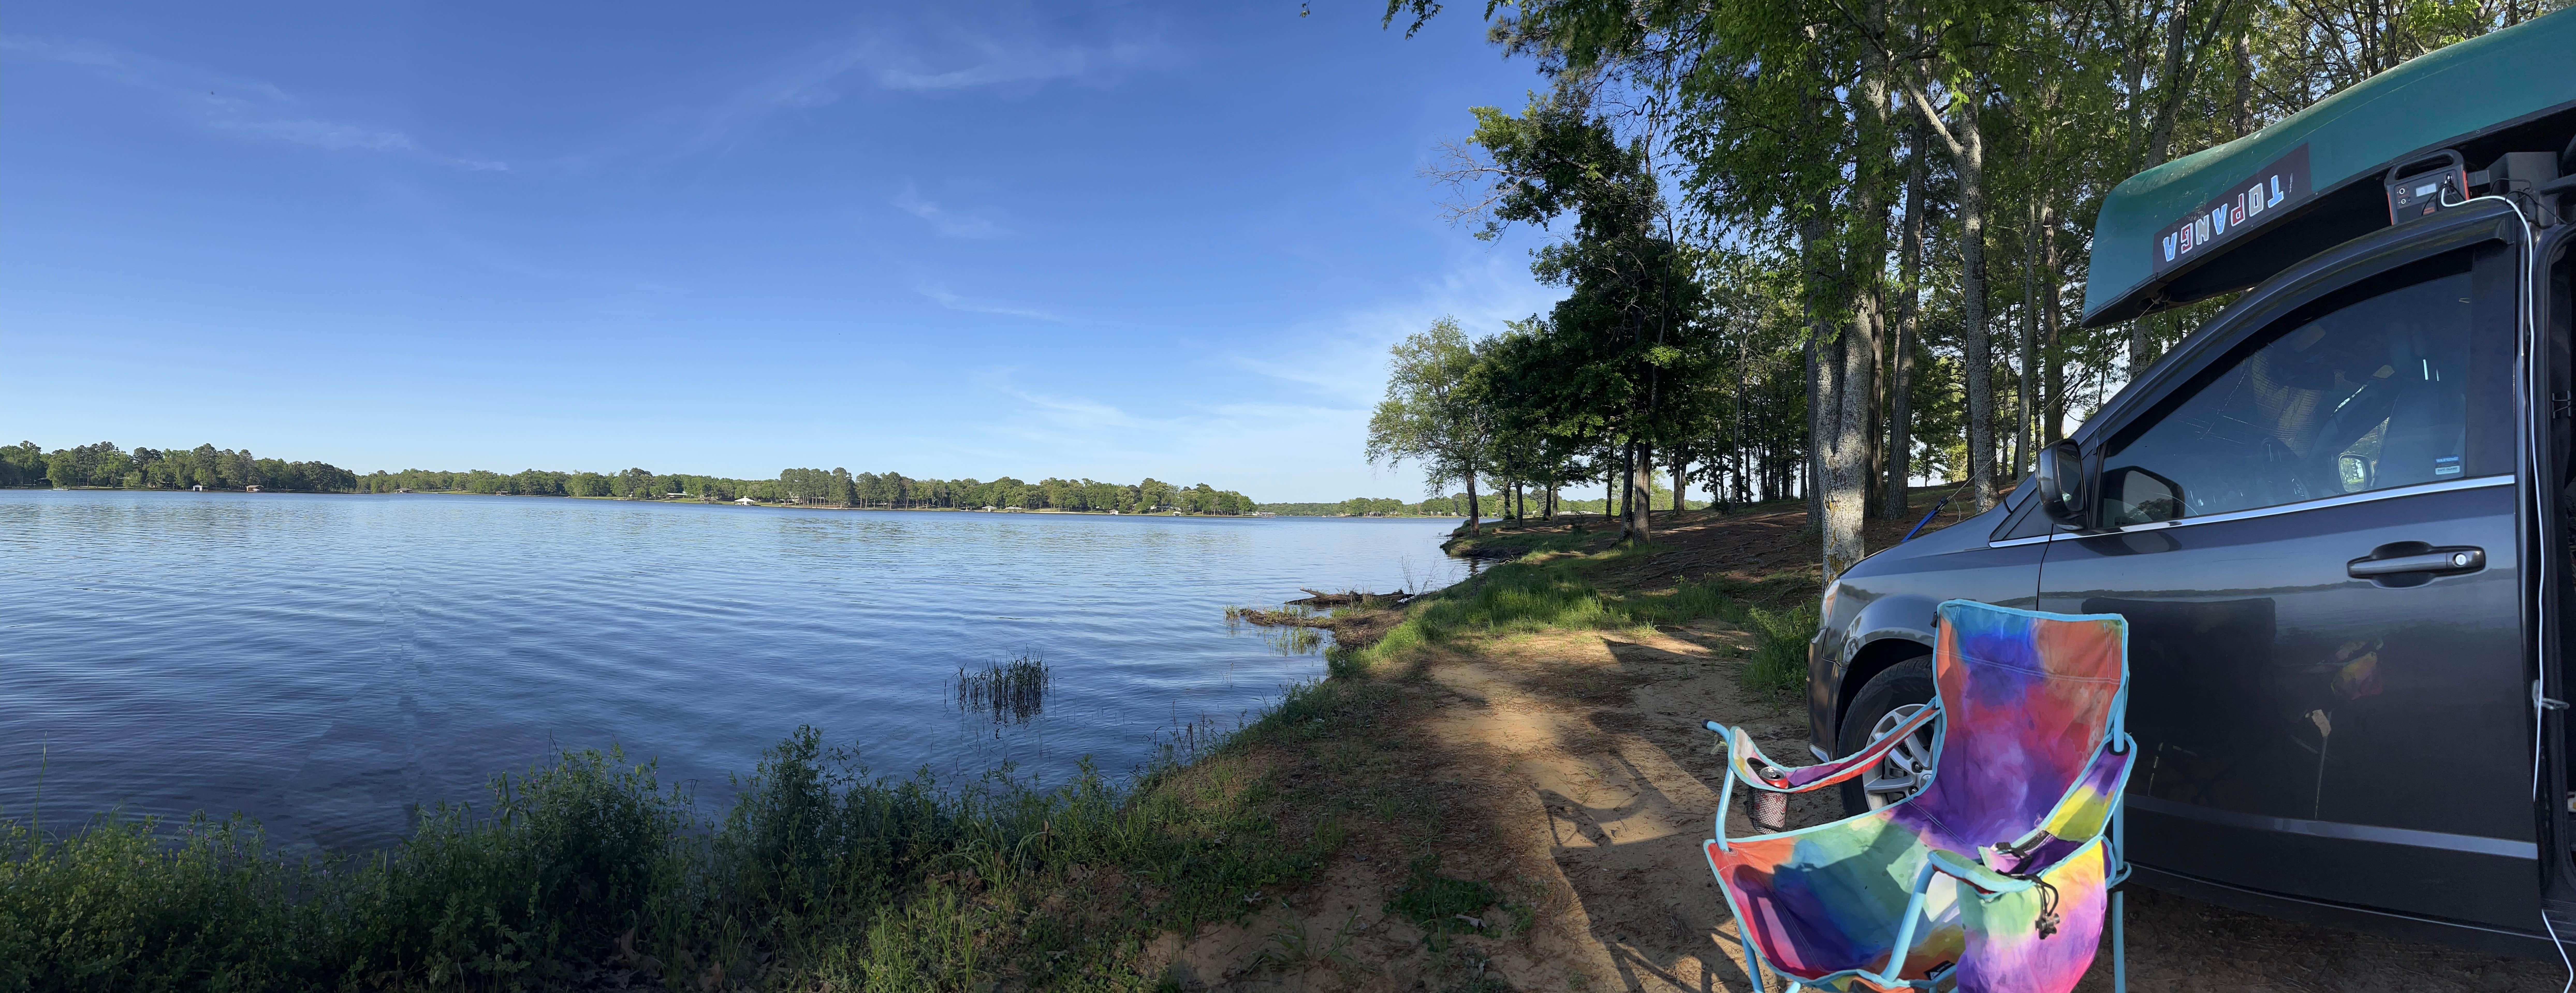 Camper submitted image from Lake Quitman West Dam - 3